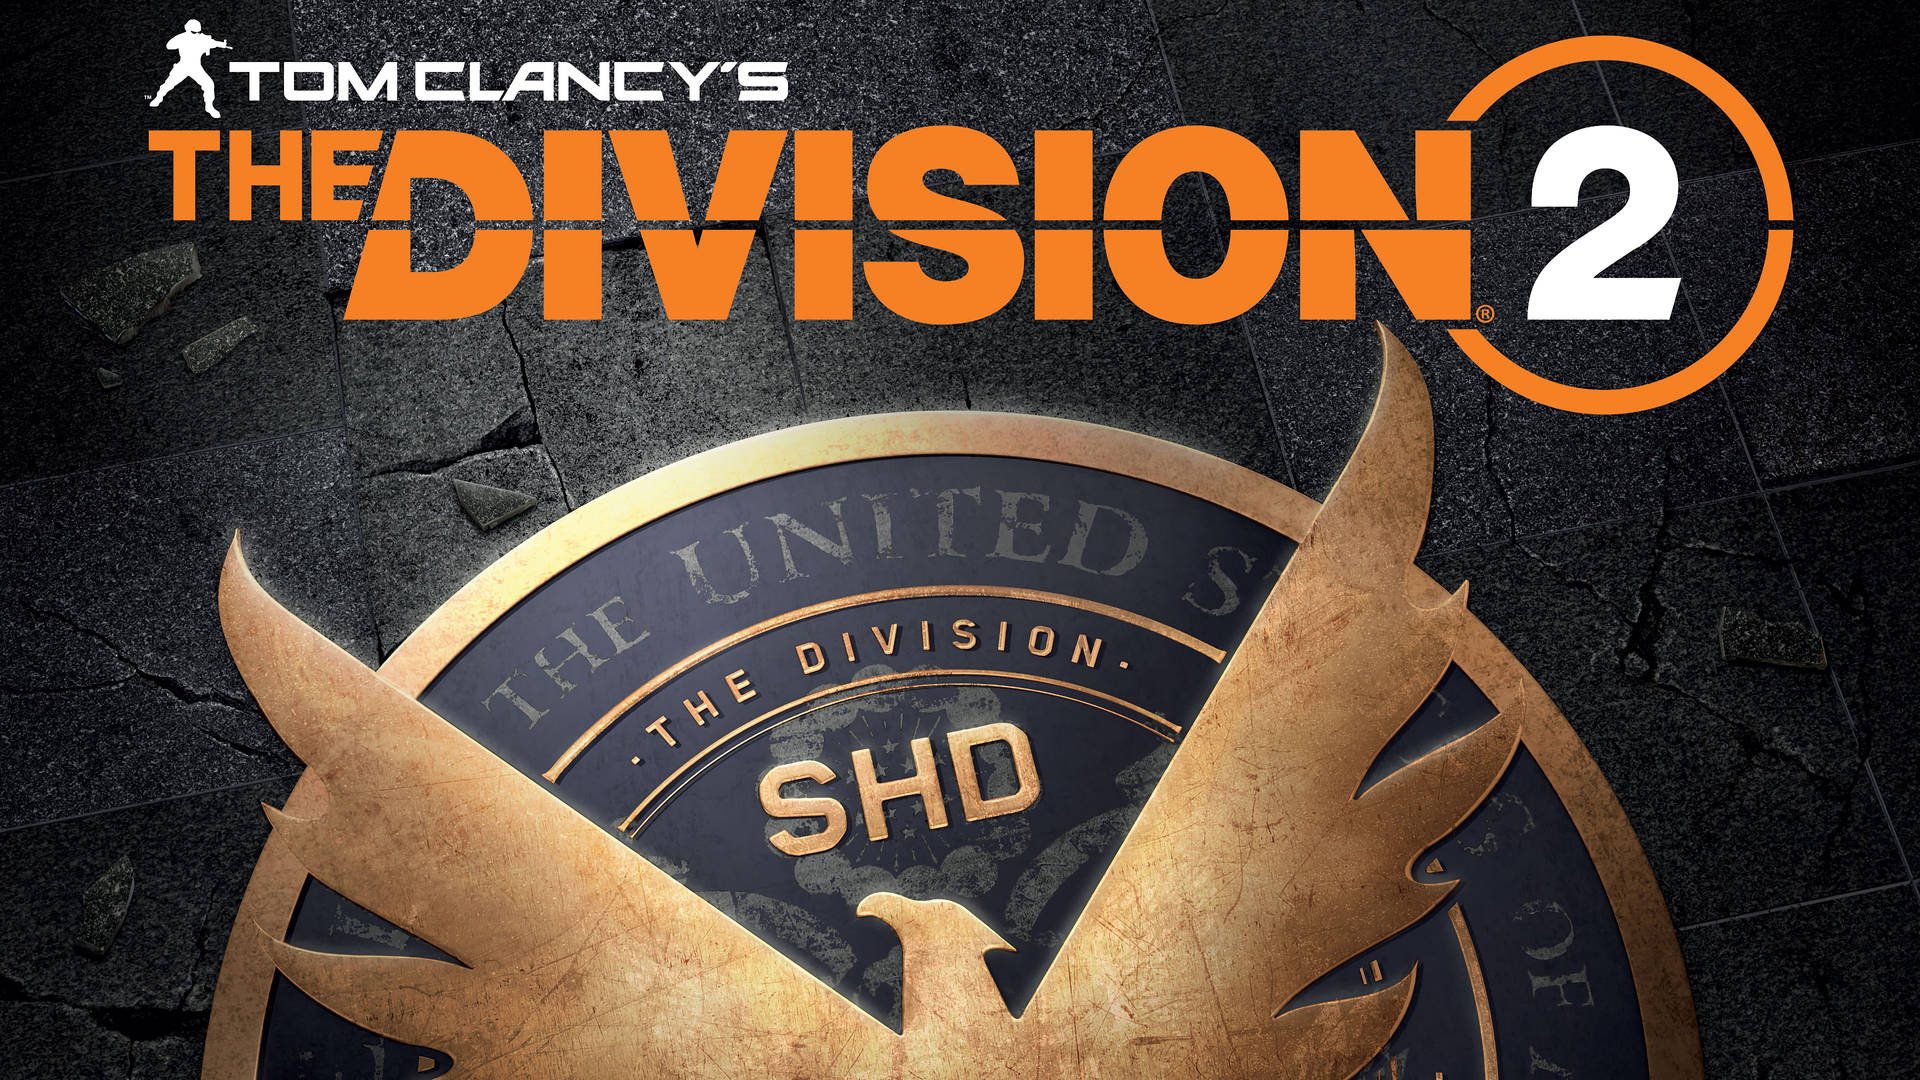 Free The Division 4k Wallpaper Downloads, [100+] The Division 4k Wallpapers  for FREE 